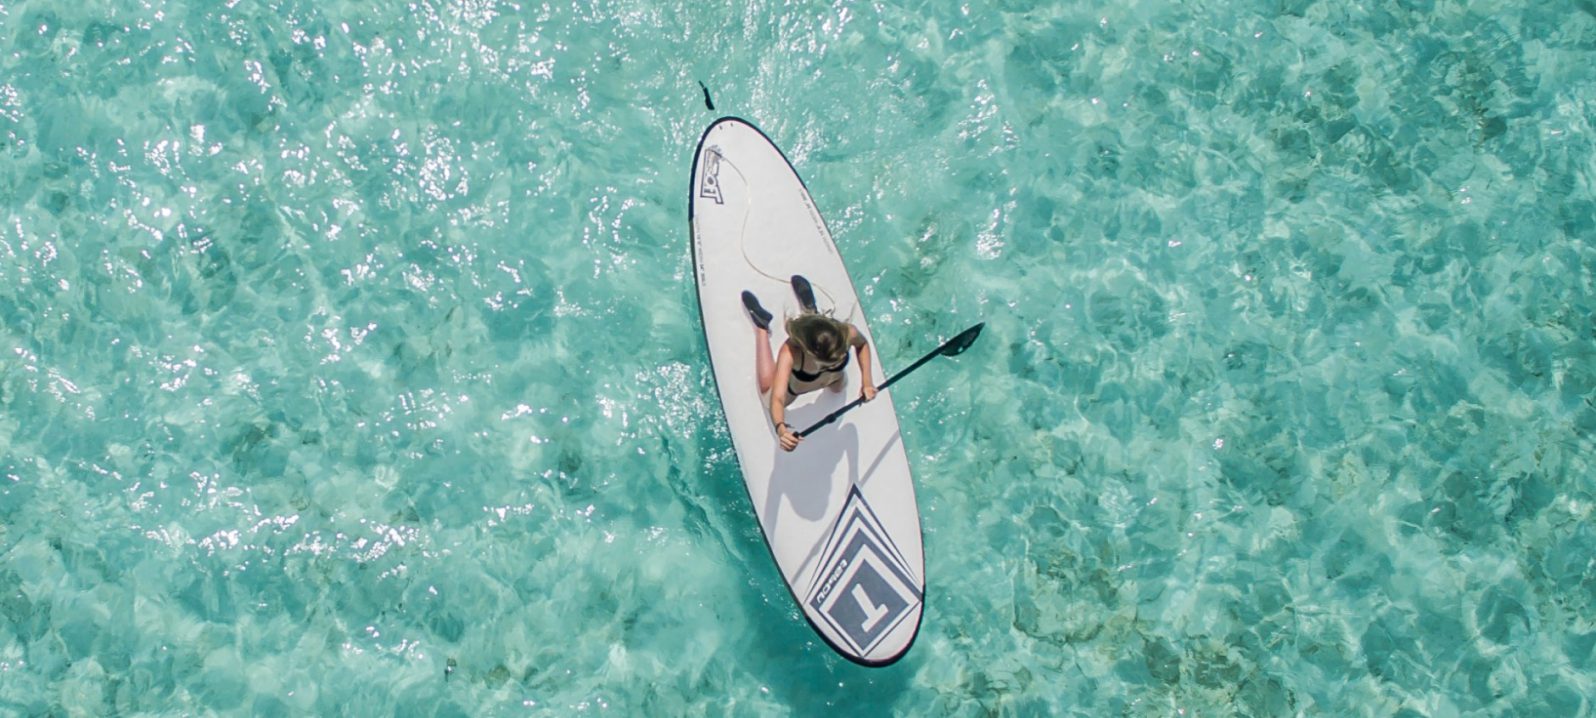 A tourist goes paddle boarding on the water in Rottnest Island